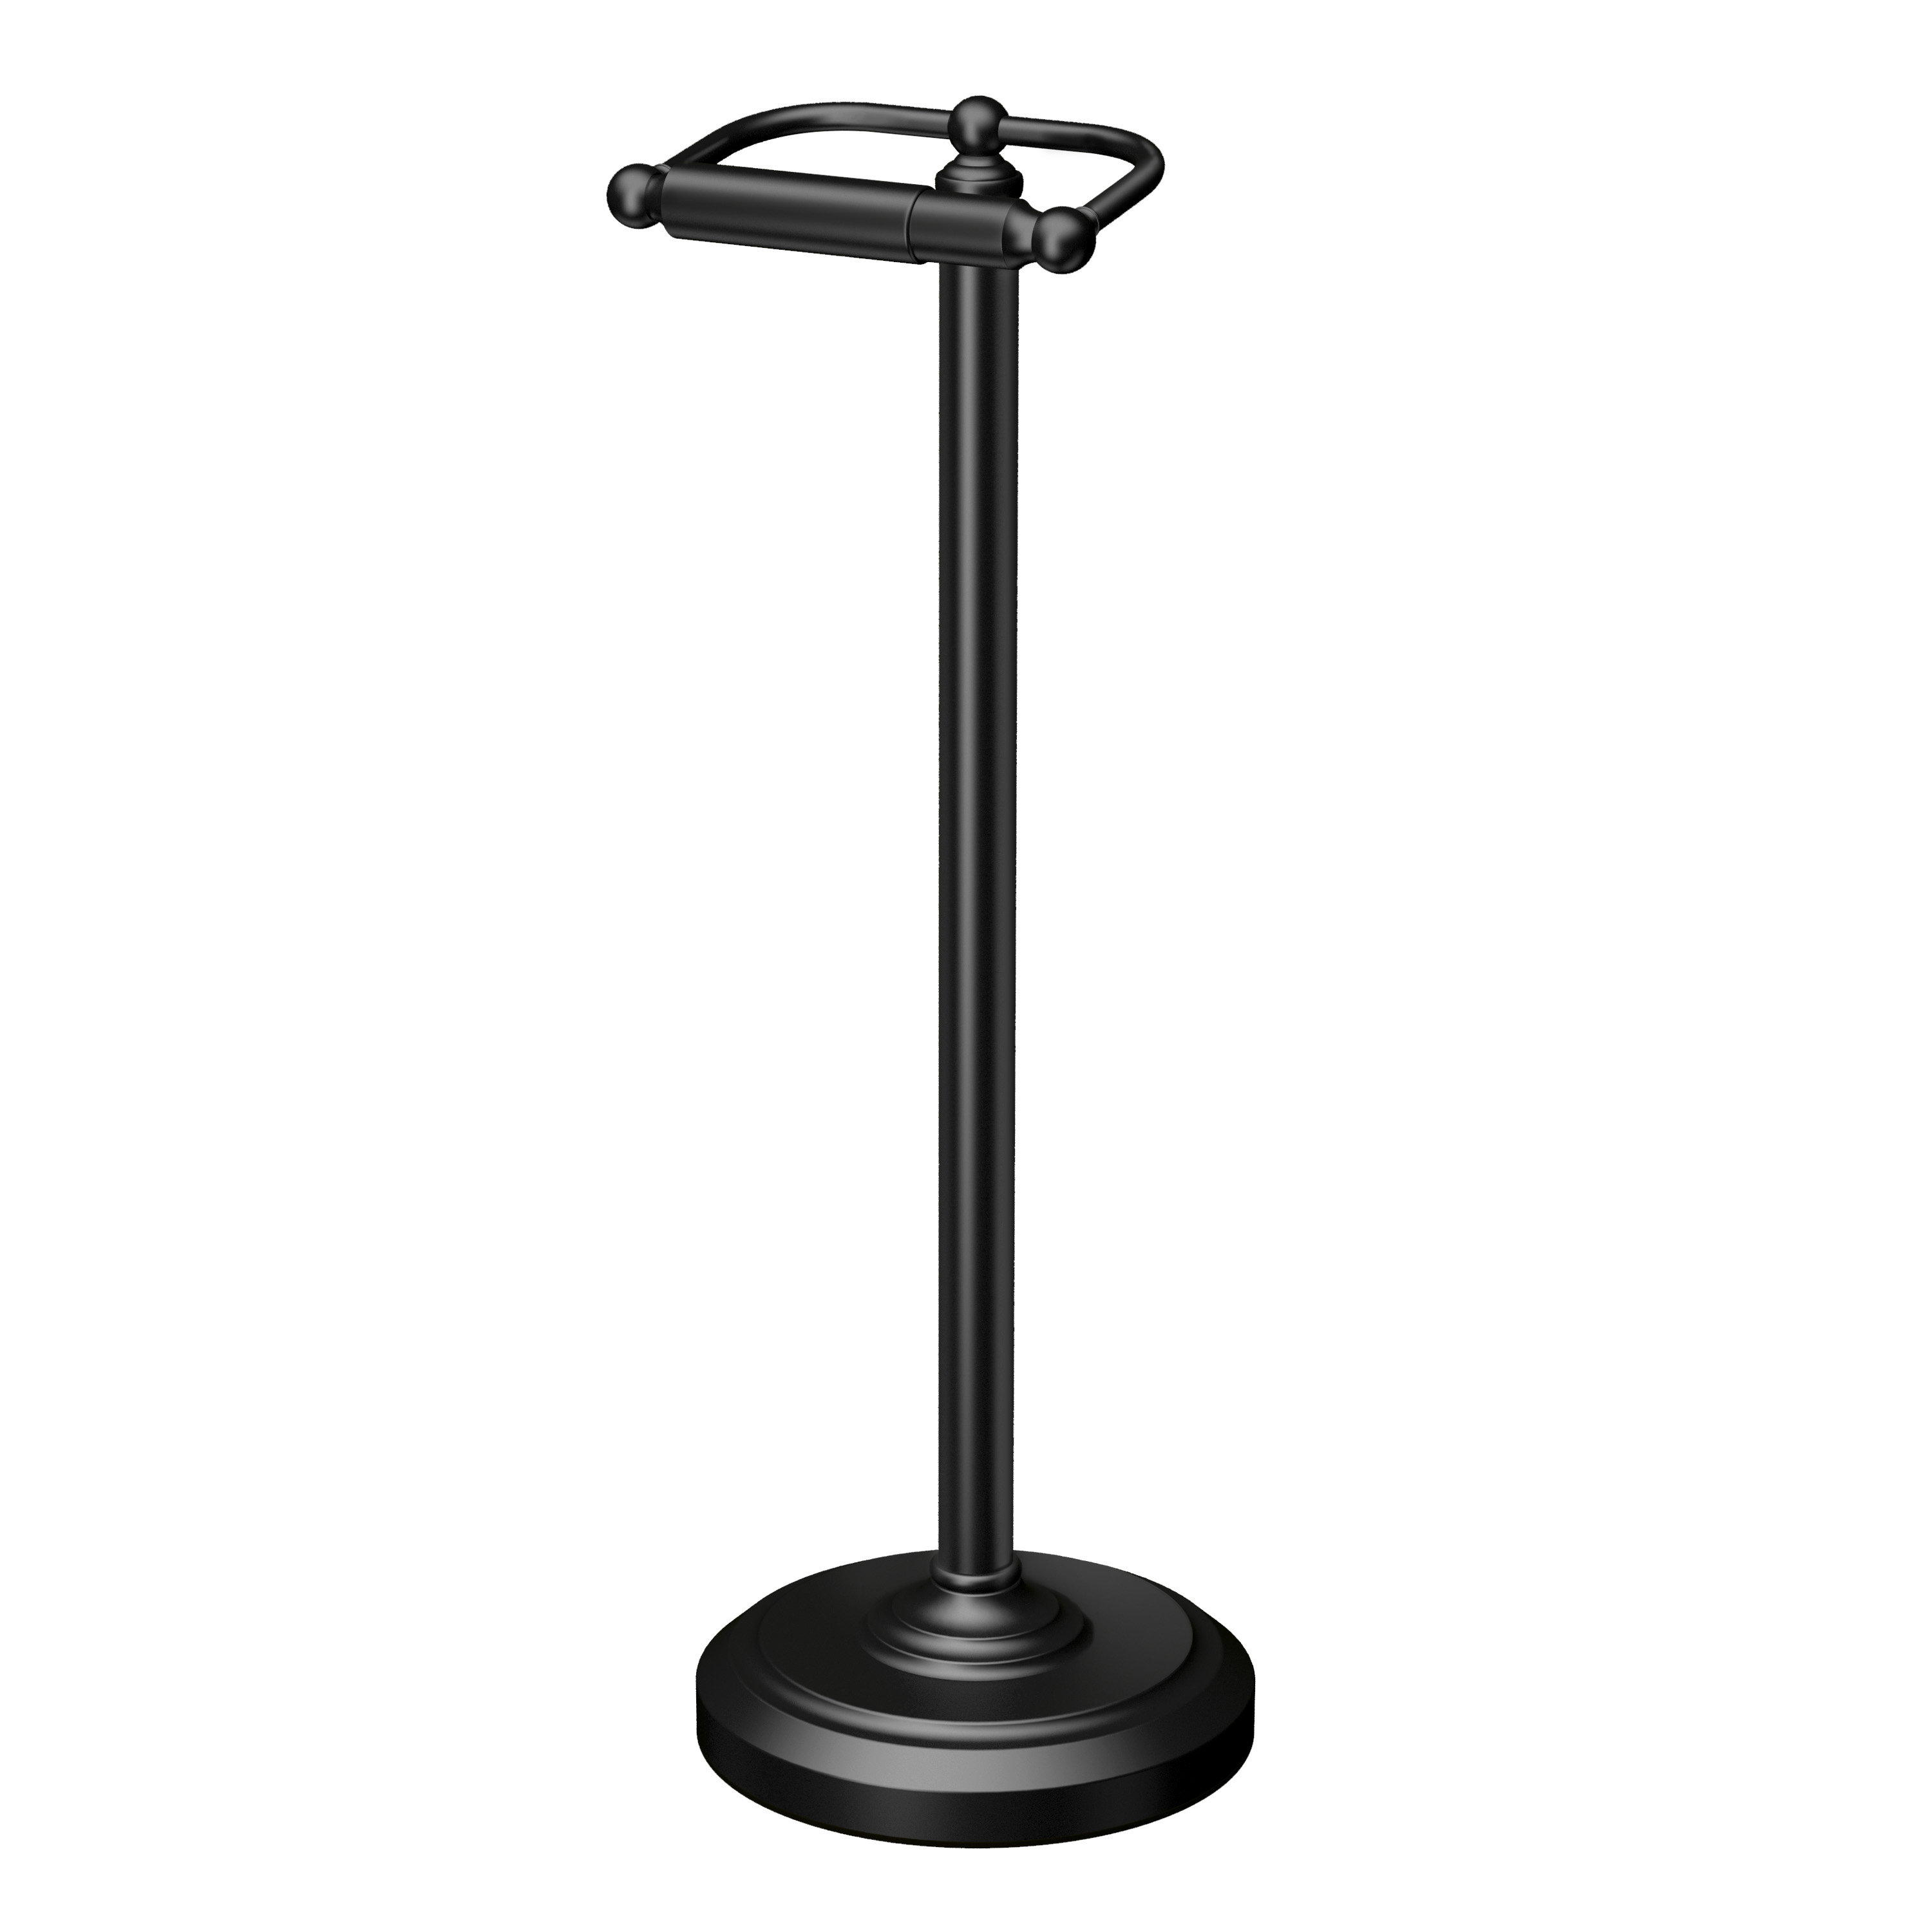 Metal Toilet Paper Holder Stand Matte Black - Hearth & Hand™ with Magnolia